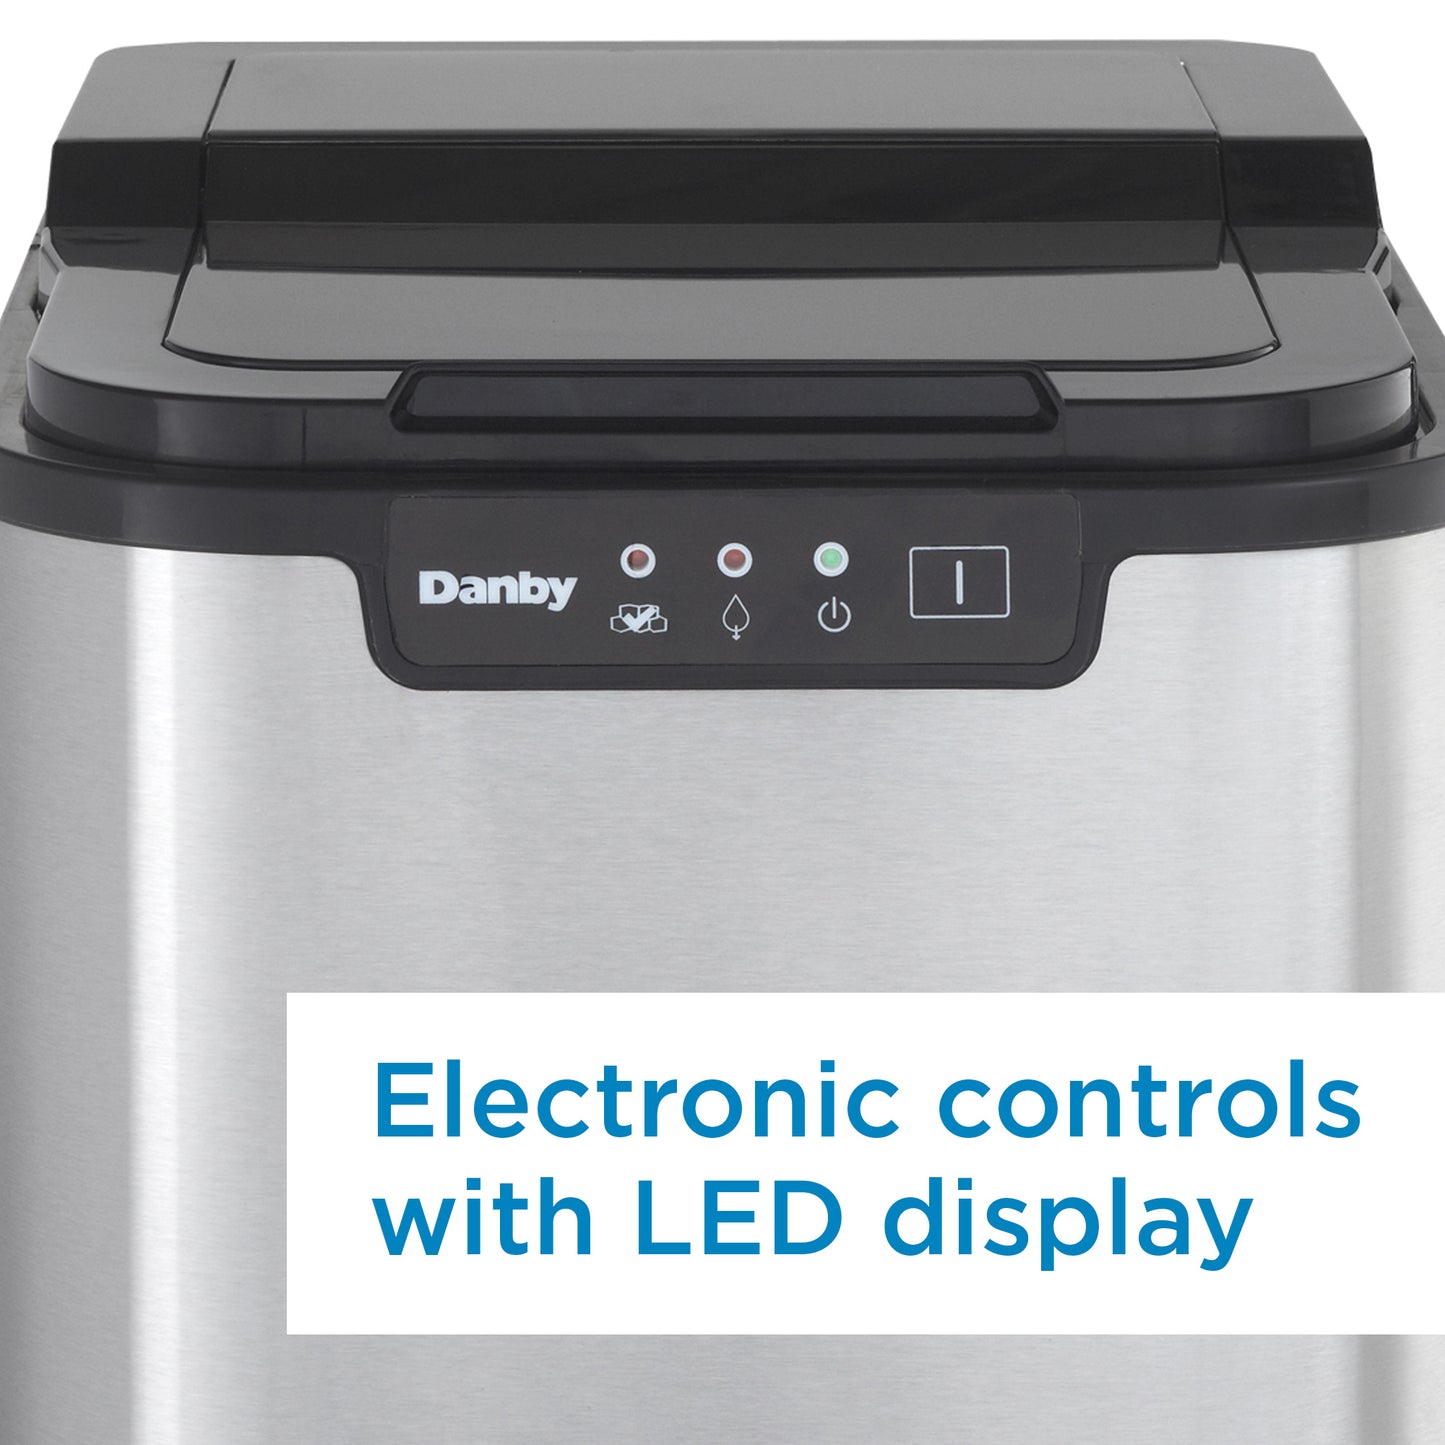 Danby 25 lbs. Countertop Ice Maker in Stainless Steel - DIM2500SSDB